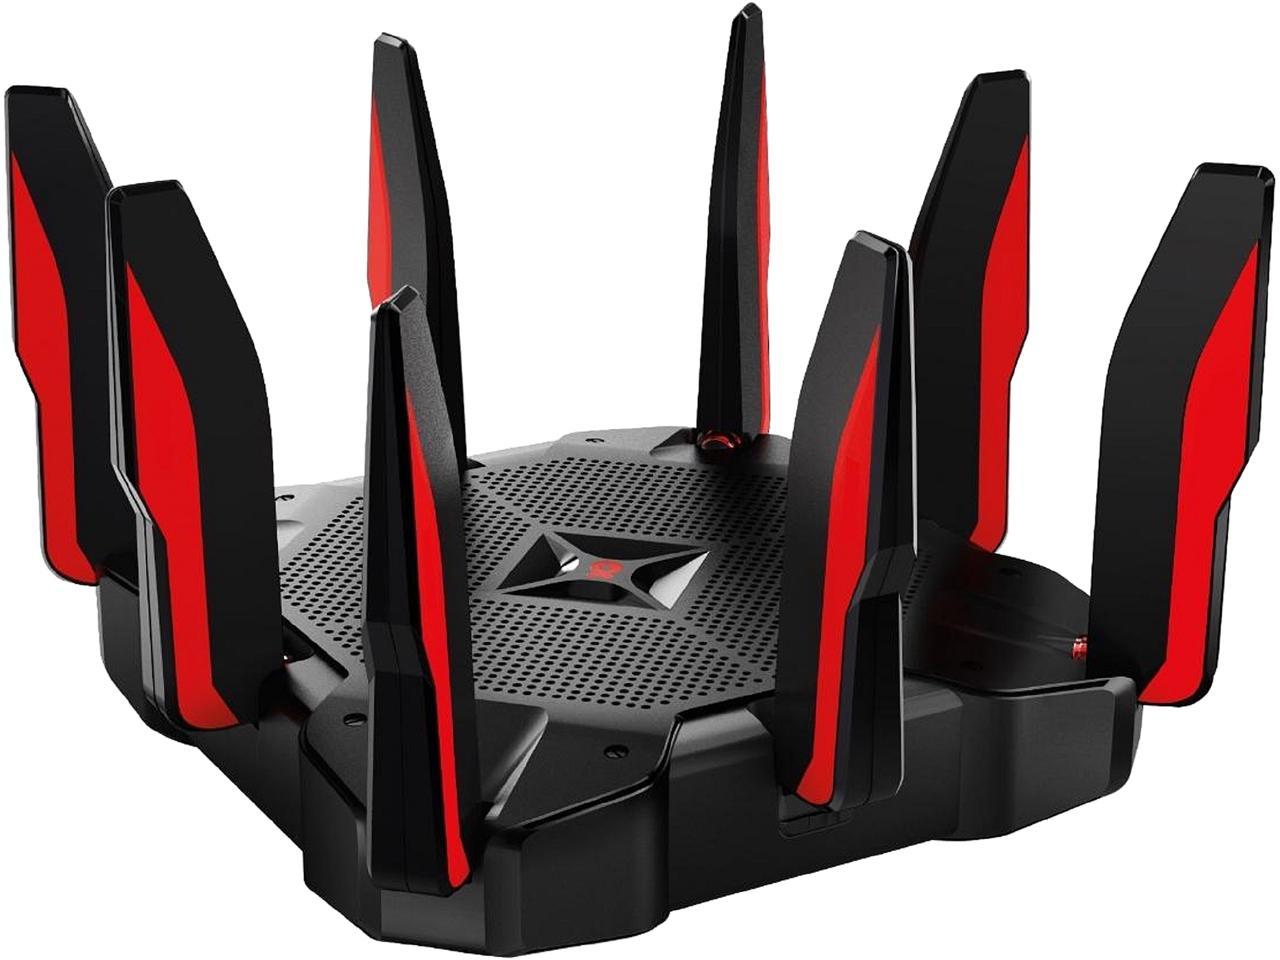 risk fitting funnel TP-Link AC5400 Tri Band WiFi Gaming Router(Archer C5400X) – MU-MIMO Wireless  Router, 1.8GHz Quad-Core 64-bit CPU, Game First Priority, Link Aggregation,  16GB Storage, Airtime Fairness - Newegg.com